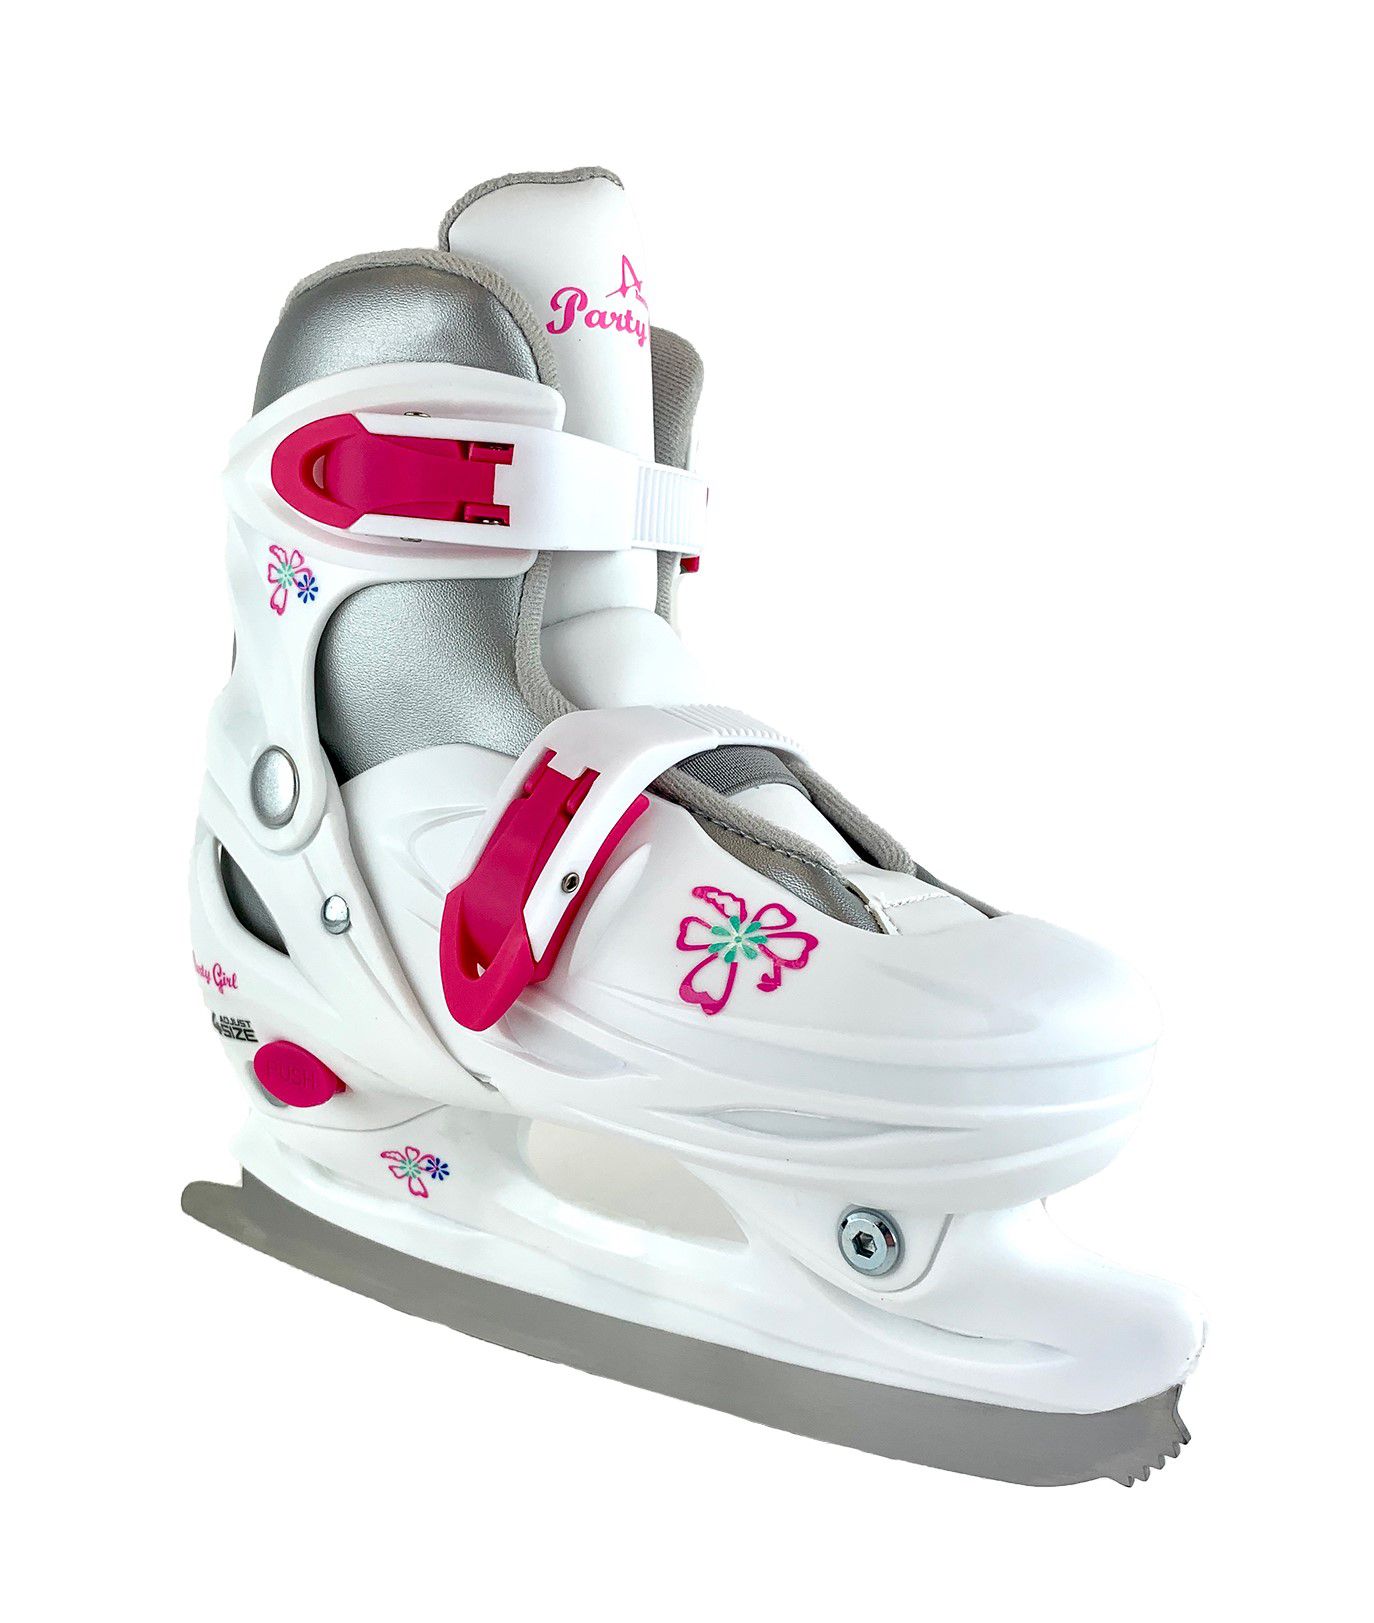 smallest size ice skates for toddlers